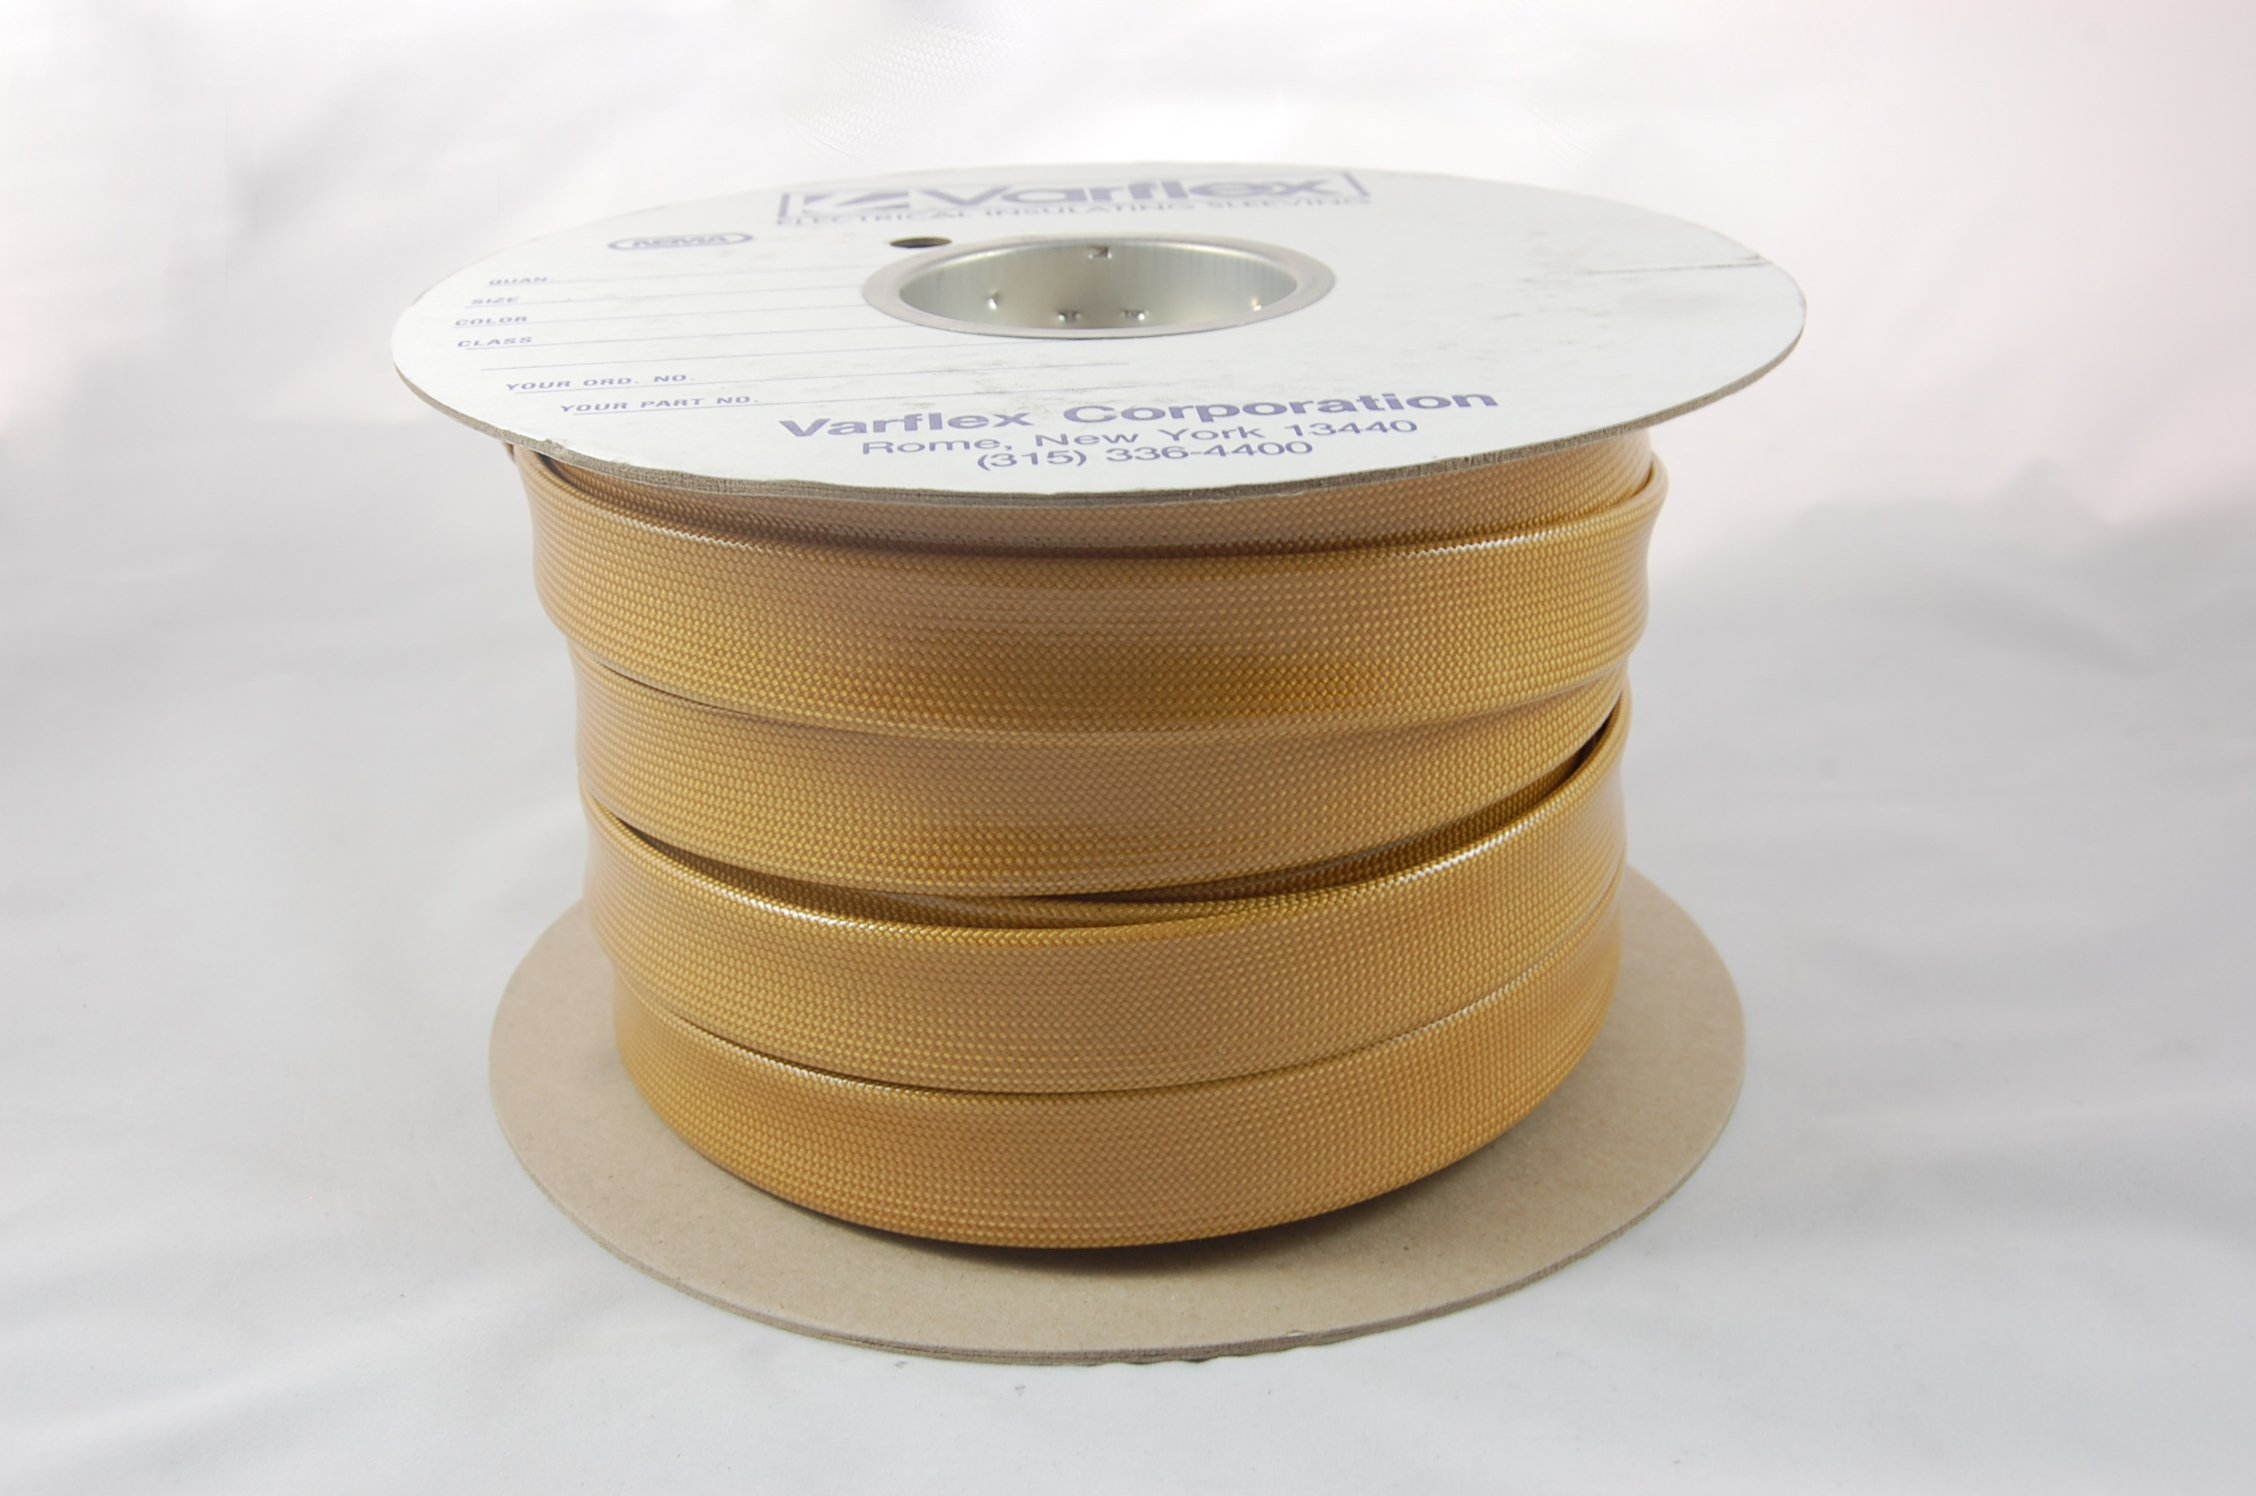 #0 AWG Varglas Silicone Resin 500 Grade H-C-1 (2500V) High Temperature Silicone Resin Coated Braided Fiberglass Sleeving 200°C, natural, 150 FT per spool